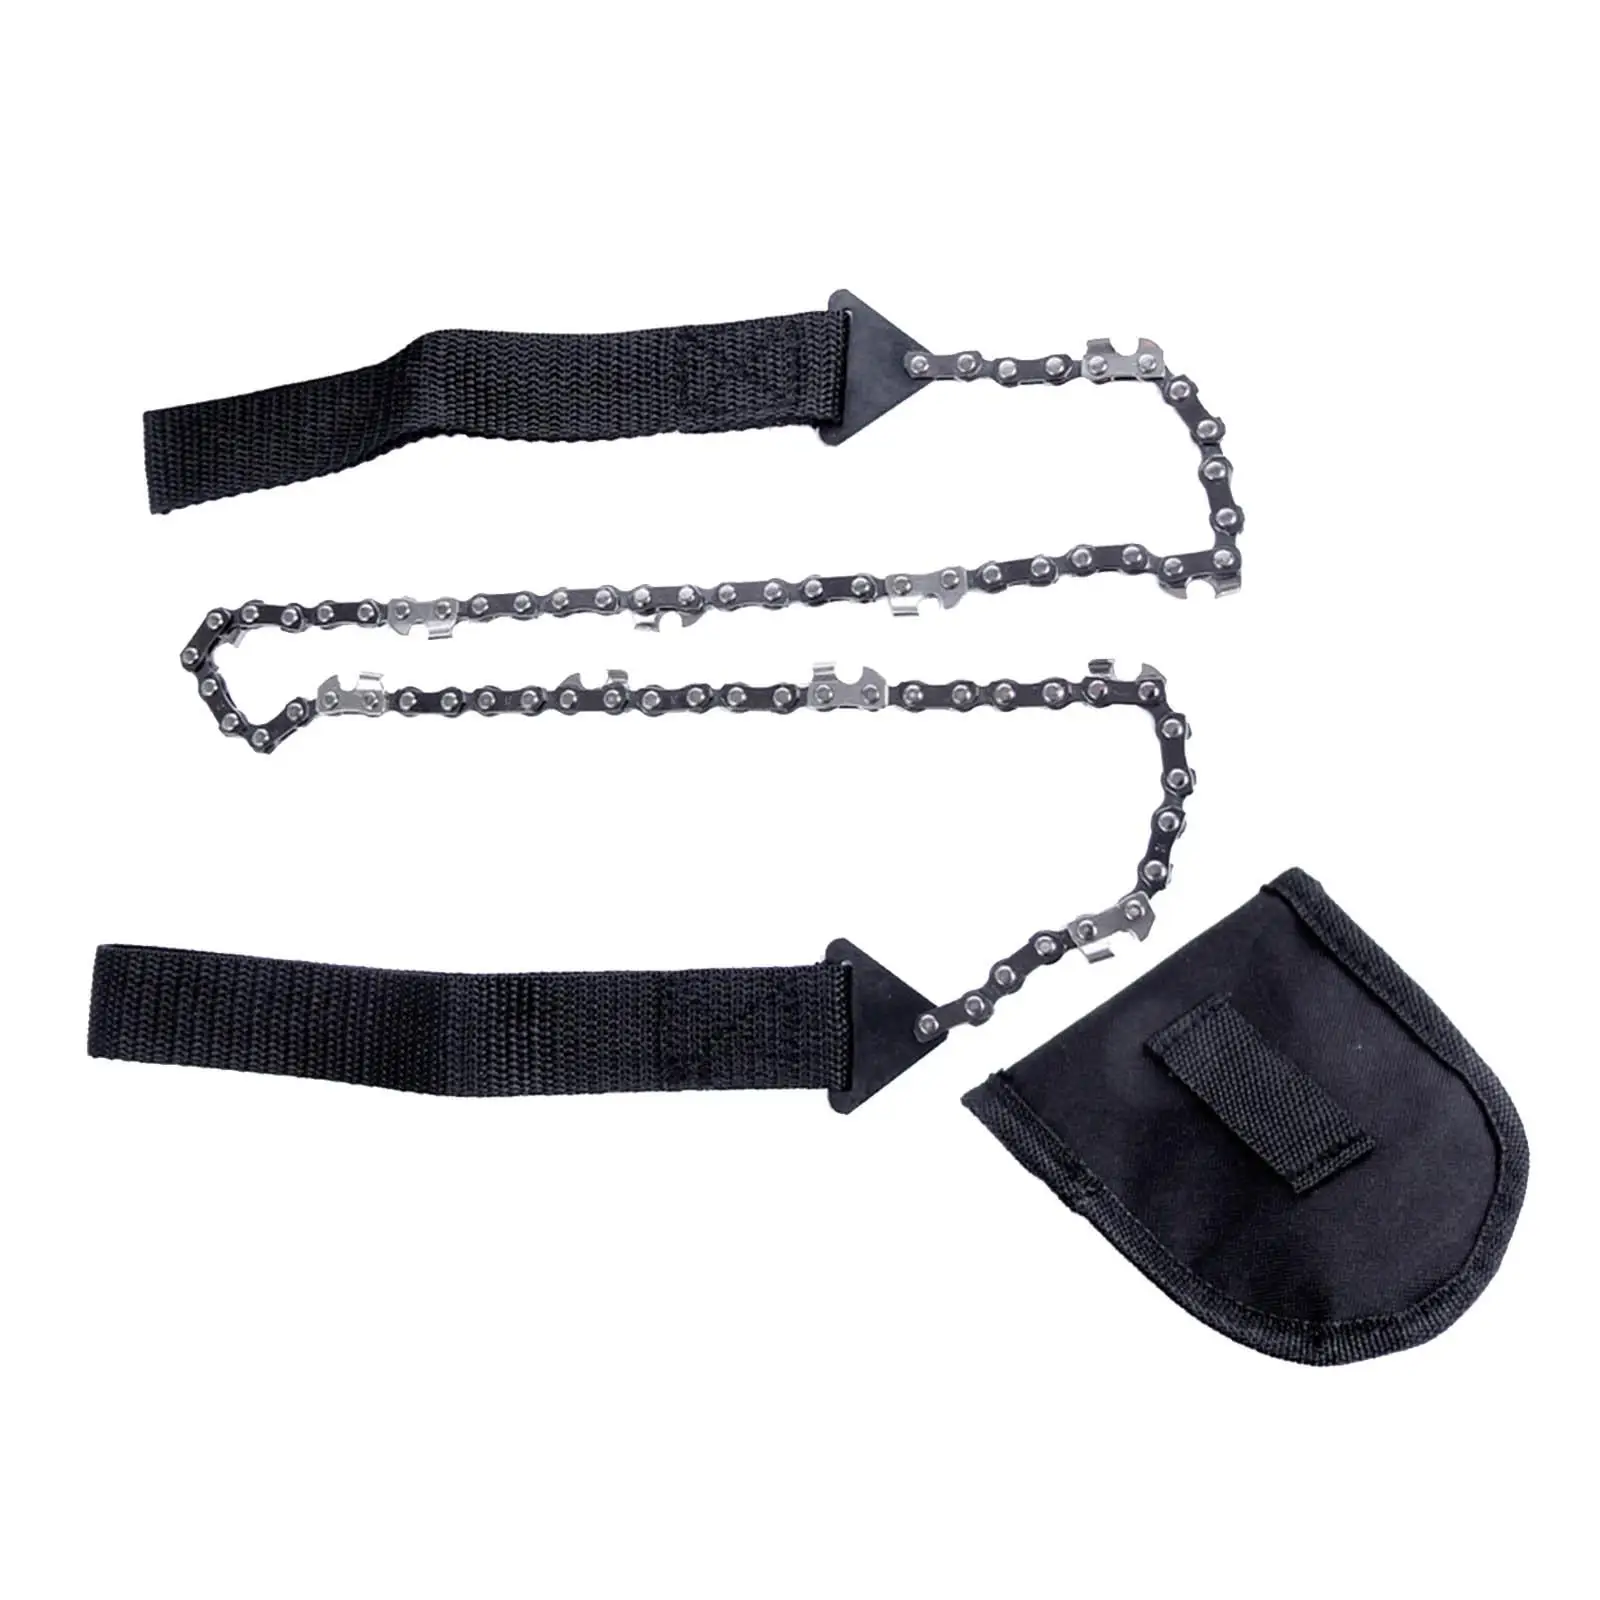 Hand Folding Rope Hand Zipper Saw for Survival Outdoor Backpacking